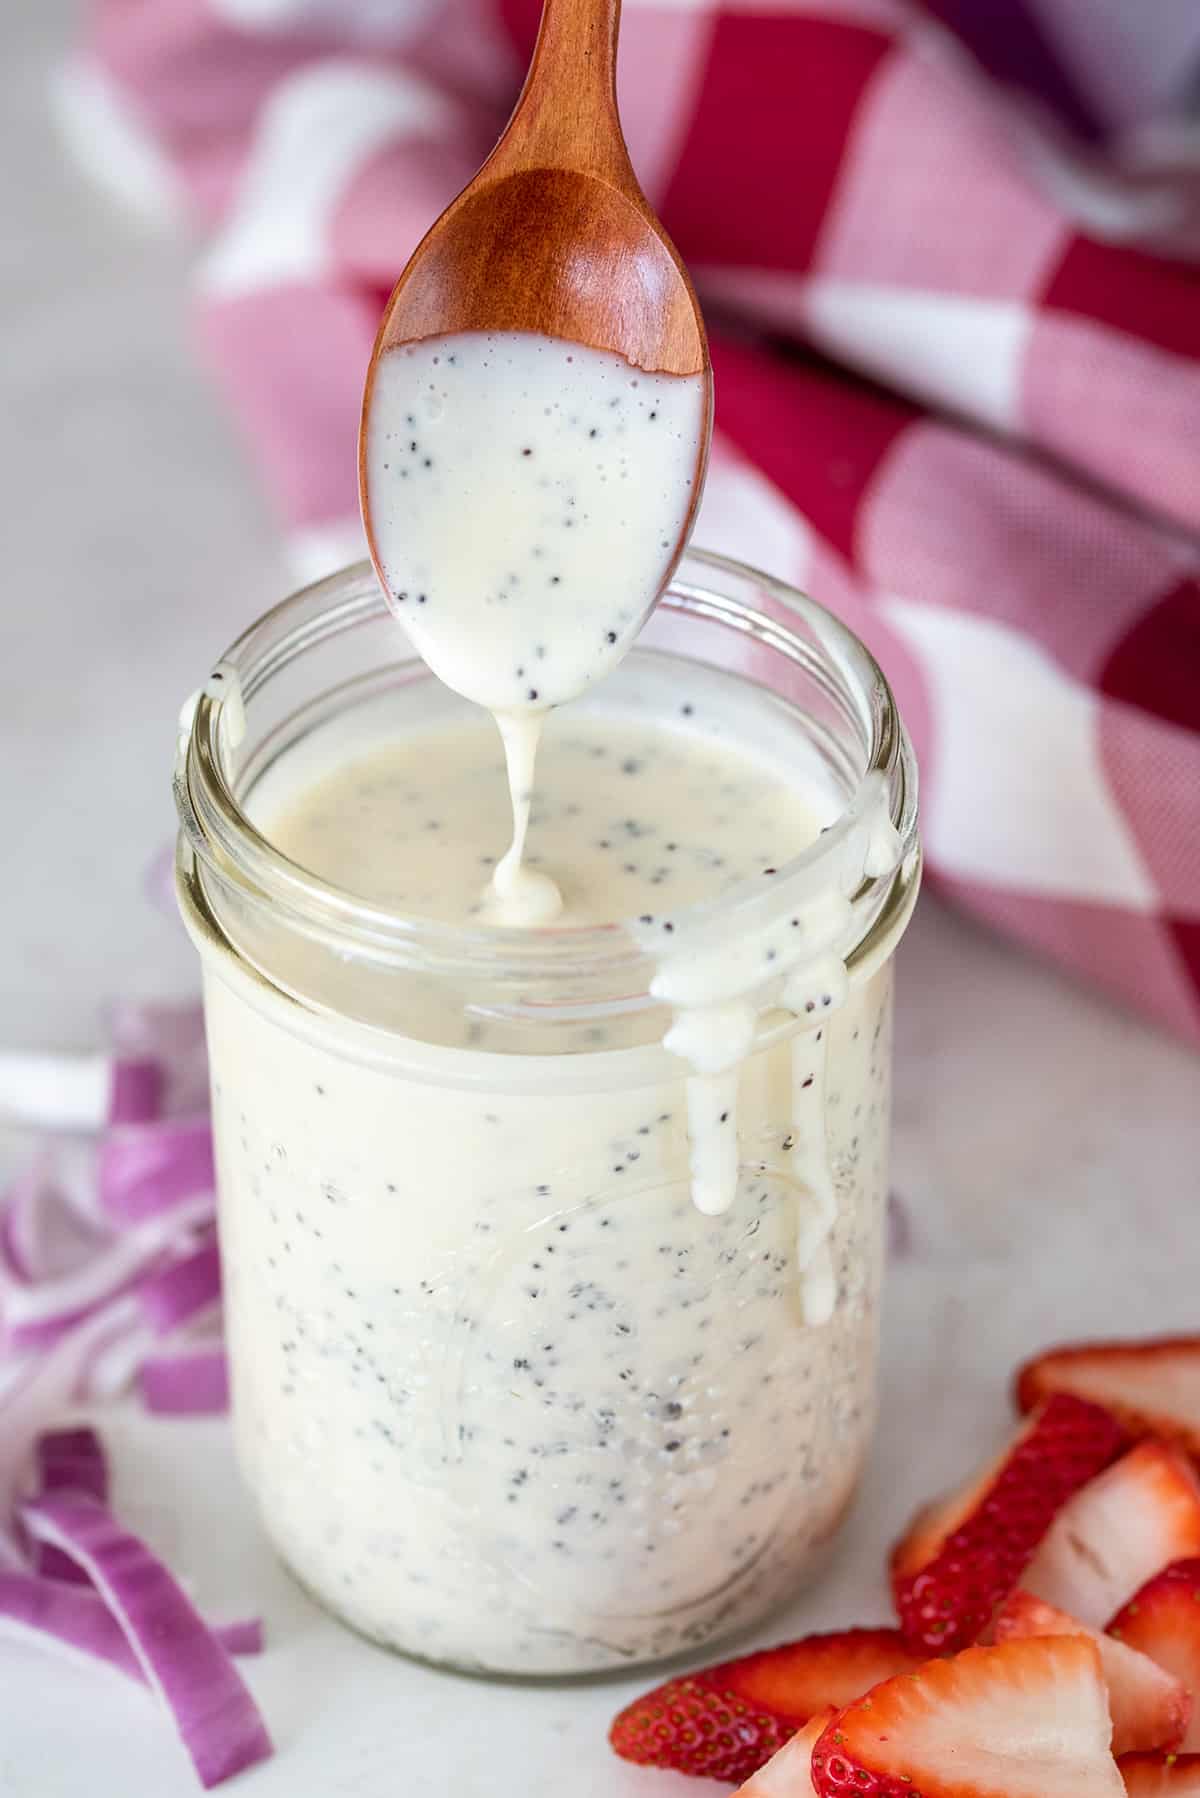 Homemade poppyseed salad dressing recipe pouring from a spoon into a mason jar to show thickness.